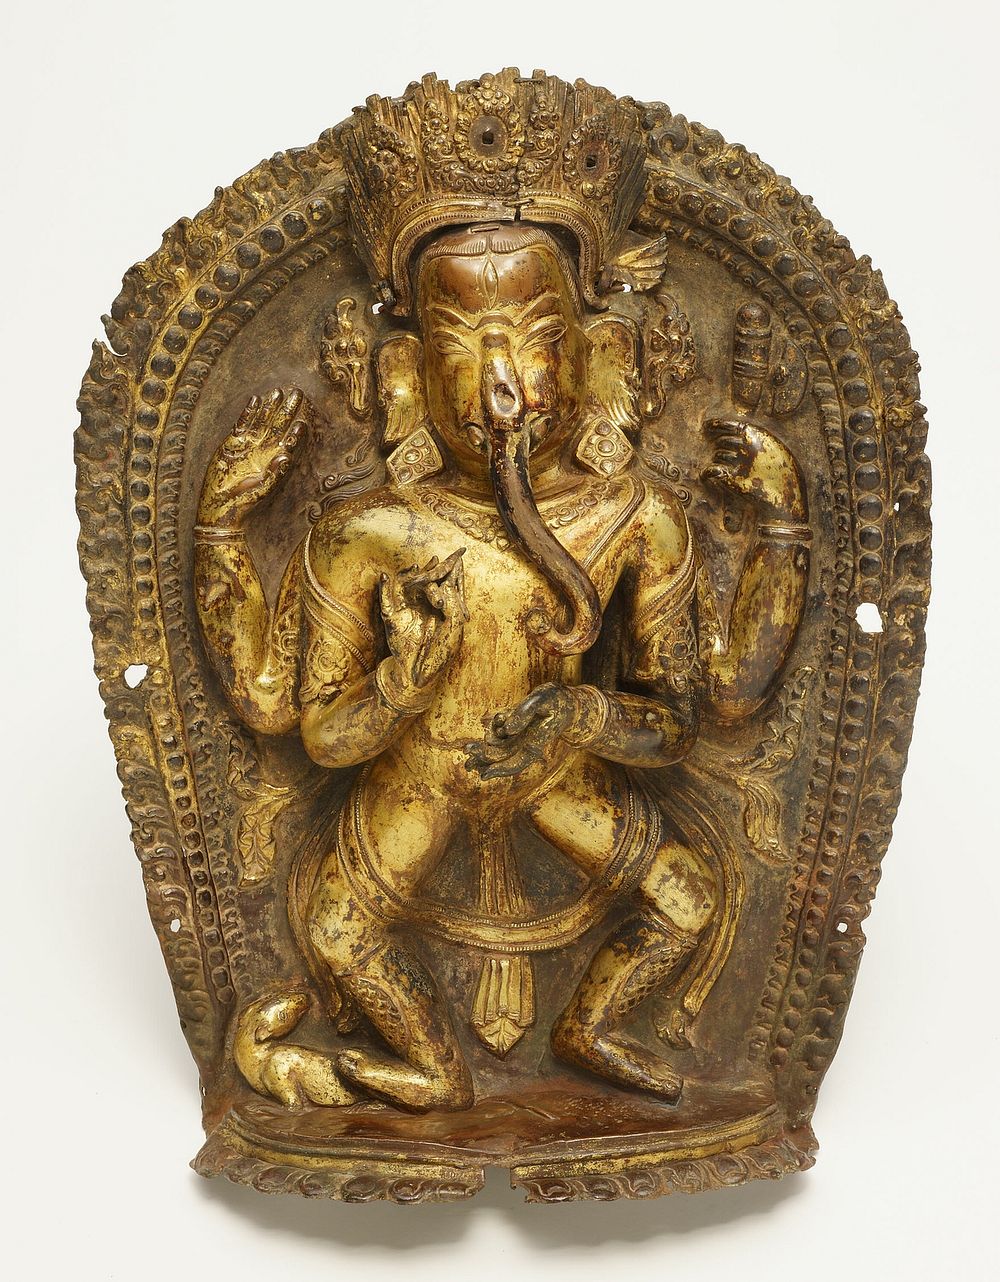 Four-Armed Dancing God Ganesha with His Rat Mount